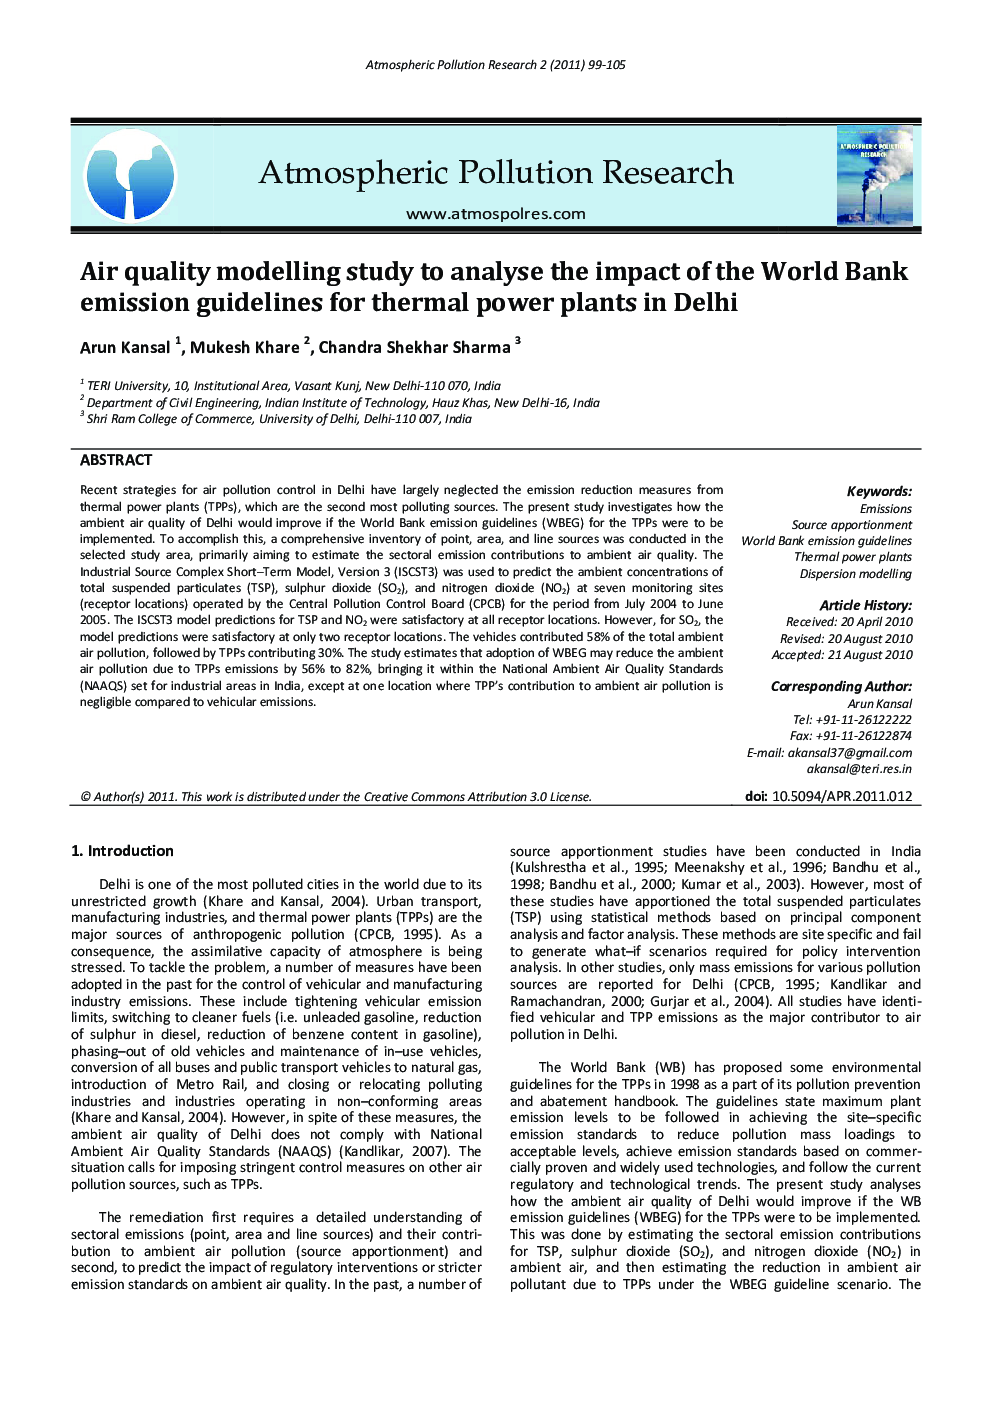 Air quality modelling study to analyse the impact of the World Bank emission guidelines for thermal power plants in Delhi